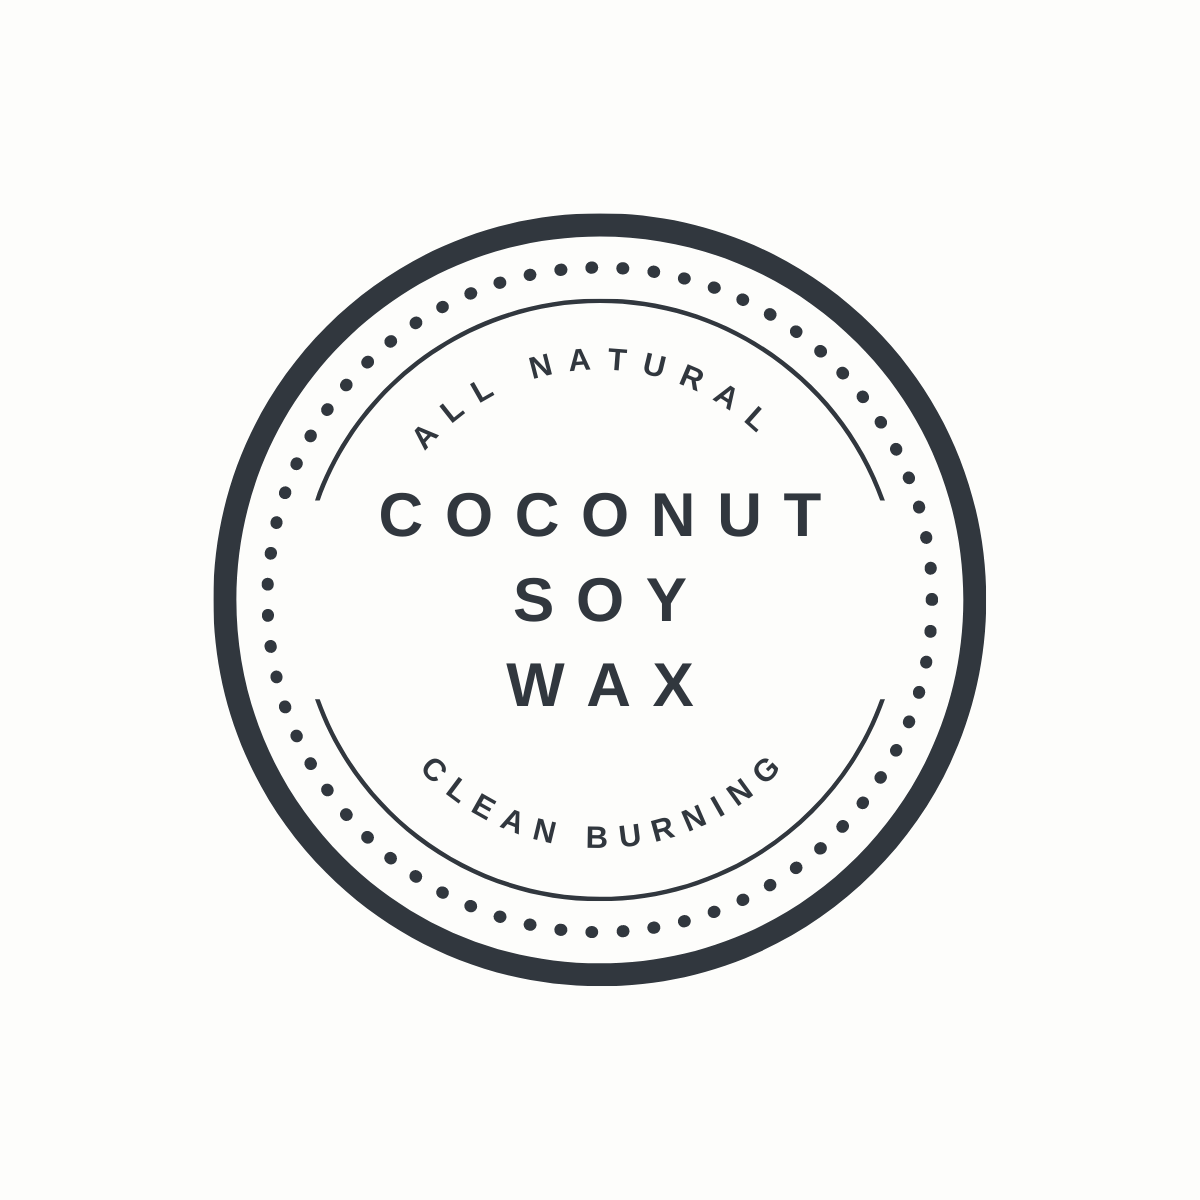 This slow and clean burning natural wax is the premium choice for luxury candle makers for its beautiful creamy texture and powerful scent throw.  Not only is it free of paraffin or petroleum, but our wax is also vegan and cruelty-free.  